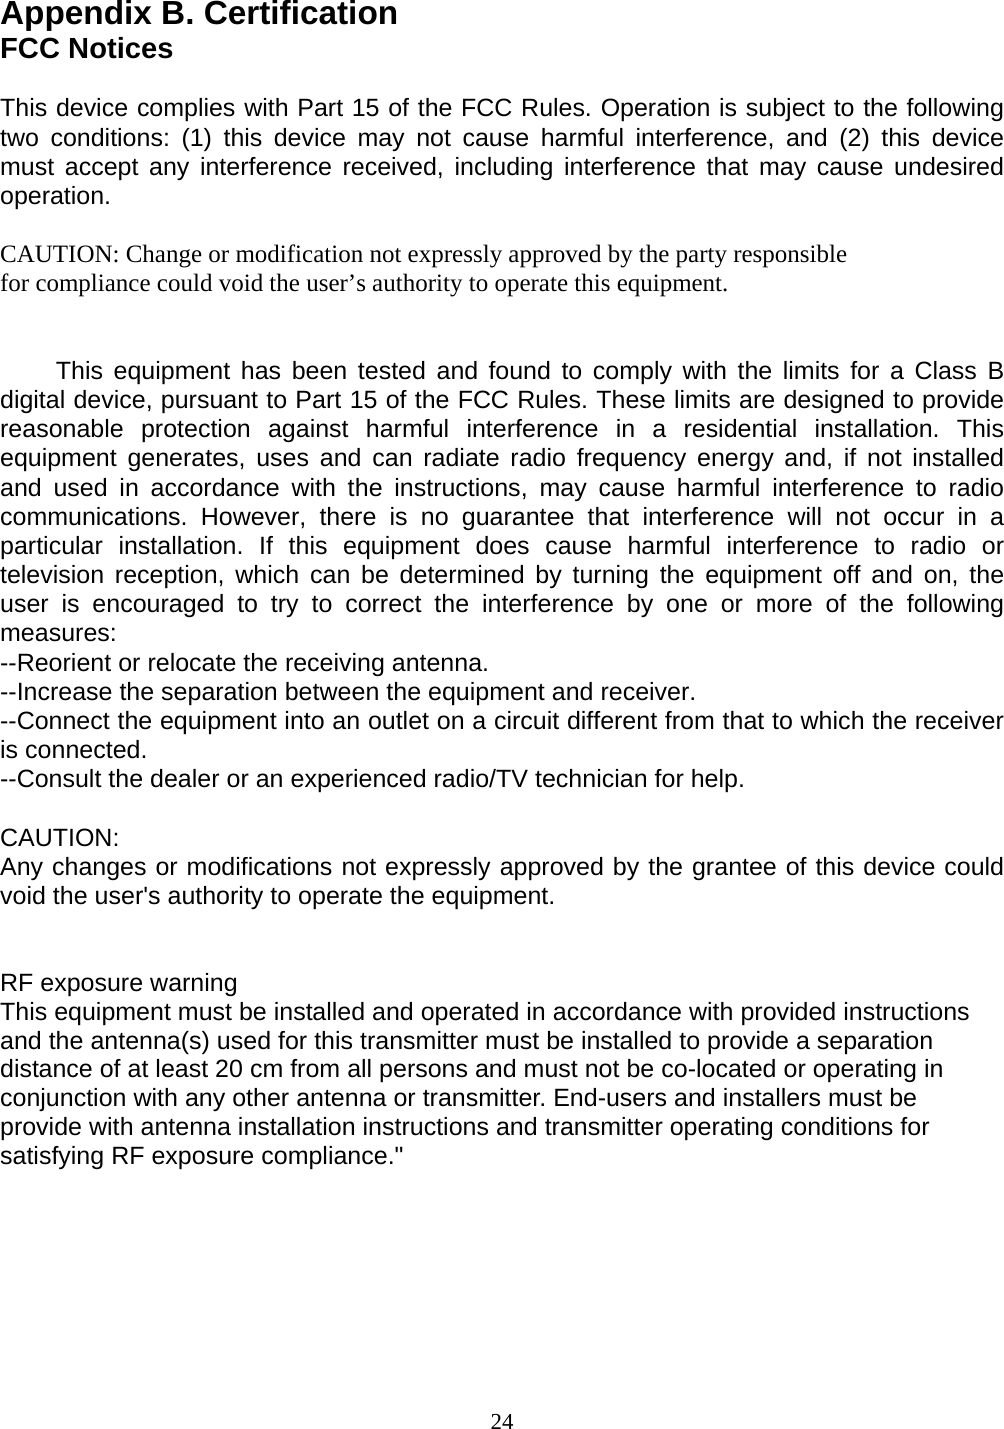 Appendix B. Certification FCC Notices  This device complies with Part 15 of the FCC Rules. Operation is subject to the following two conditions: (1) this device may not cause harmful interference, and (2) this device must accept any interference received, including interference that may cause undesired operation.  CAUTION: Change or modification not expressly approved by the party responsible for compliance could void the user’s authority to operate this equipment.           This equipment  has  been tested and found to comply with the limits for a Class B digital device, pursuant to Part 15 of the FCC Rules. These limits are designed to provide reasonable protection against harmful interference in a residential installation. This equipment generates, uses and can radiate radio frequency energy and, if not installed and used in accordance with the instructions, may cause harmful interference to radio communications. However, there is no guarantee that interference will not occur in a particular installation. If this equipment does cause harmful interference to radio or television reception, which can be determined by turning the equipment off and on, the user is encouraged to try to correct the interference by one or more of the following measures: --Reorient or relocate the receiving antenna. --Increase the separation between the equipment and receiver. --Connect the equipment into an outlet on a circuit different from that to which the receiver is connected. --Consult the dealer or an experienced radio/TV technician for help.  CAUTION: Any changes or modifications not expressly approved by the grantee of this device could void the user&apos;s authority to operate the equipment.    RF exposure warning   This equipment must be installed and operated in accordance with provided instructions and the antenna(s) used for this transmitter must be installed to provide a separation distance of at least 20 cm from all persons and must not be co-located or operating in conjunction with any other antenna or transmitter. End-users and installers must be provide with antenna installation instructions and transmitter operating conditions for satisfying RF exposure compliance.&quot;         24 